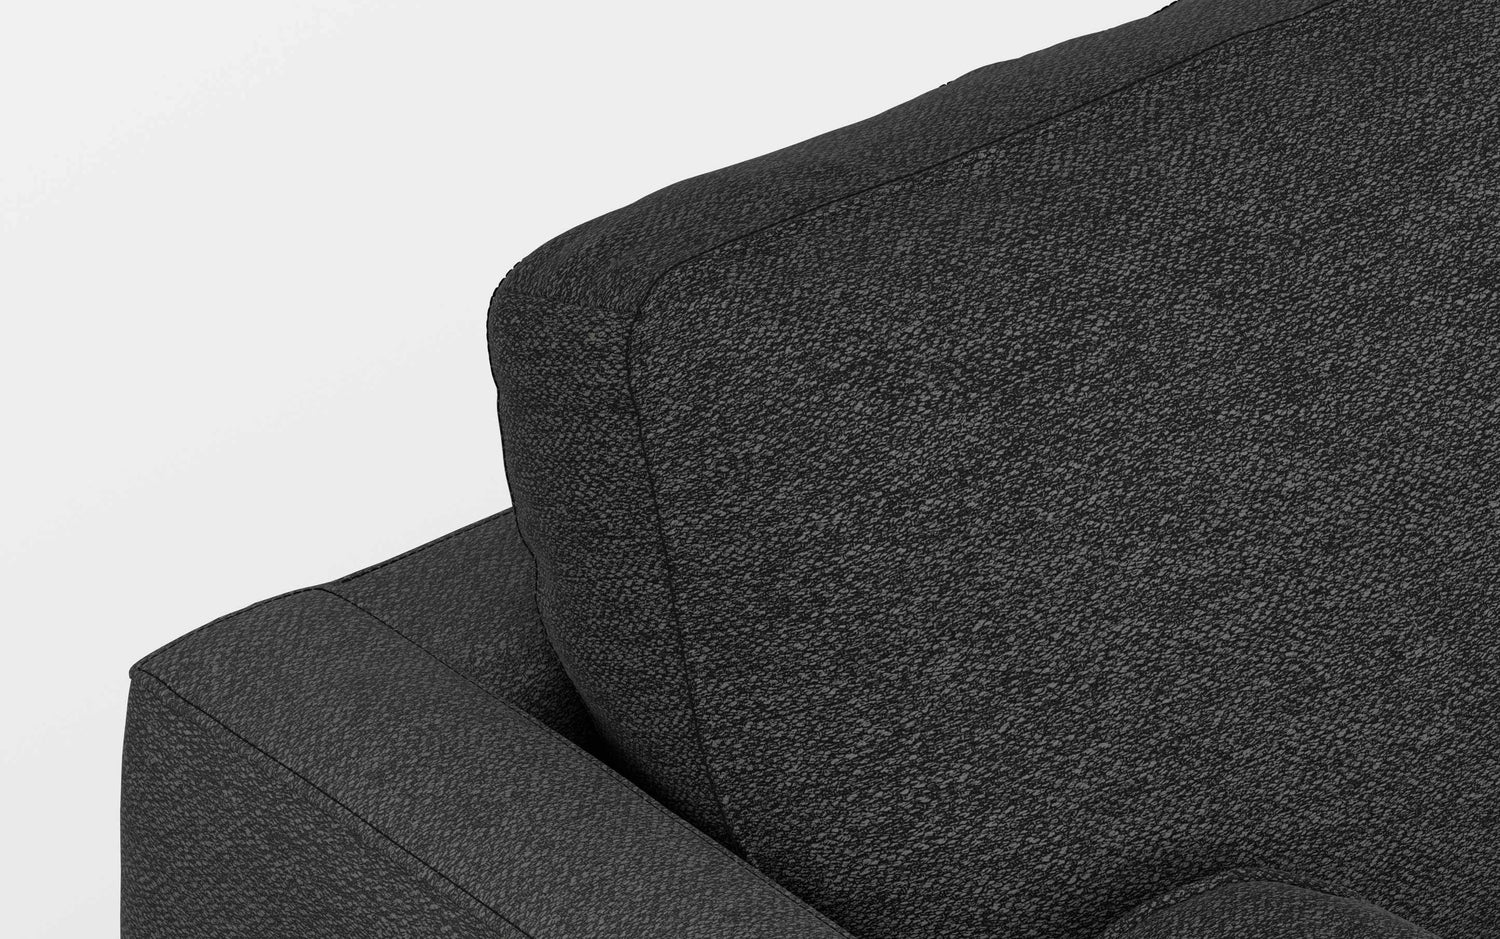 Charcoal Grey Woven Polyester Fabric | Livingston 90 inch Mid Century Sofa